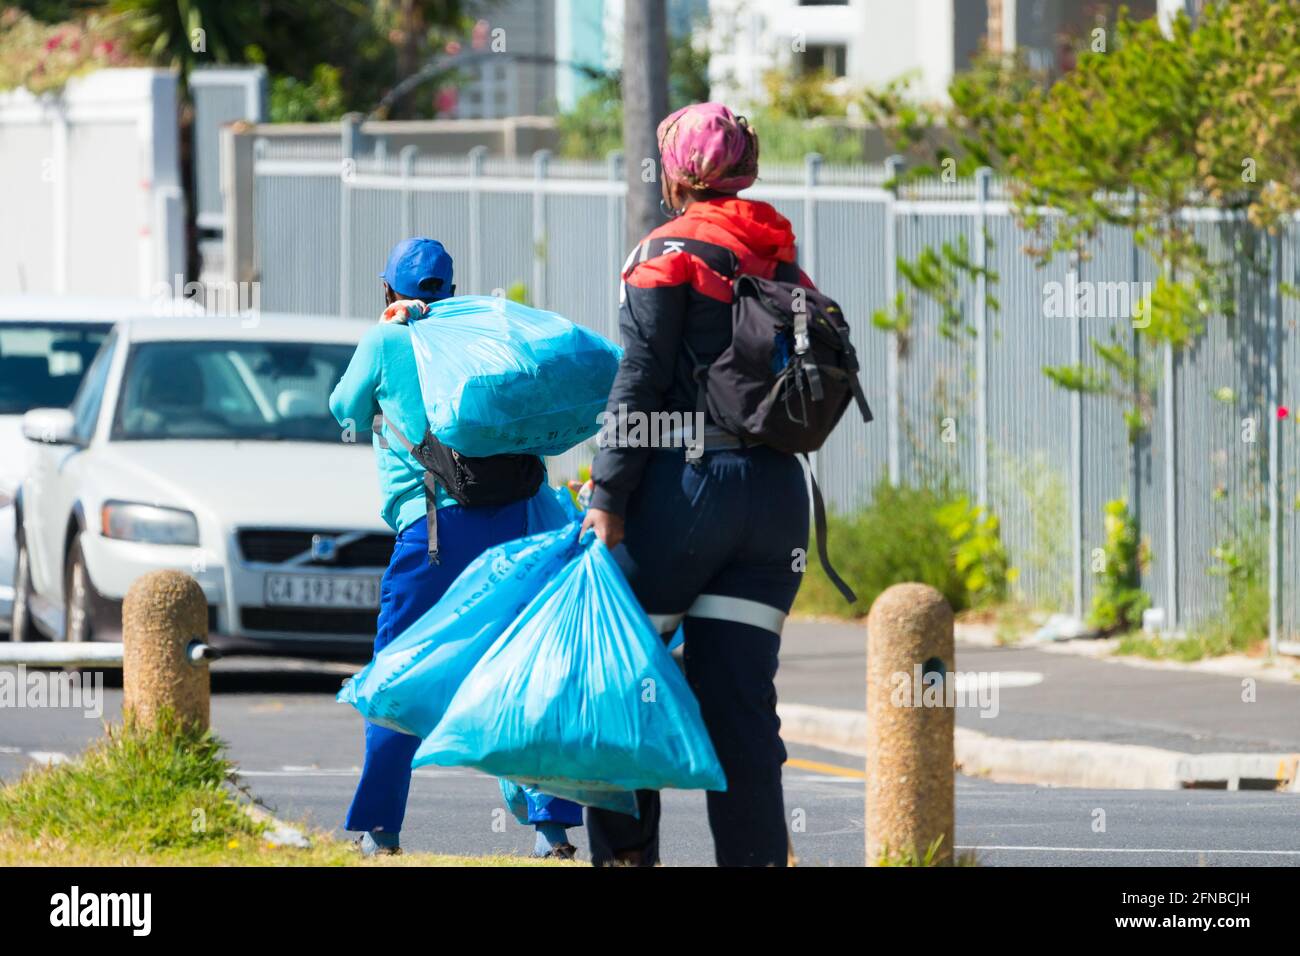 garbage collectors carrying waste or trash bags in the street during a clean up service in Cape Town, South Africa Stock Photo